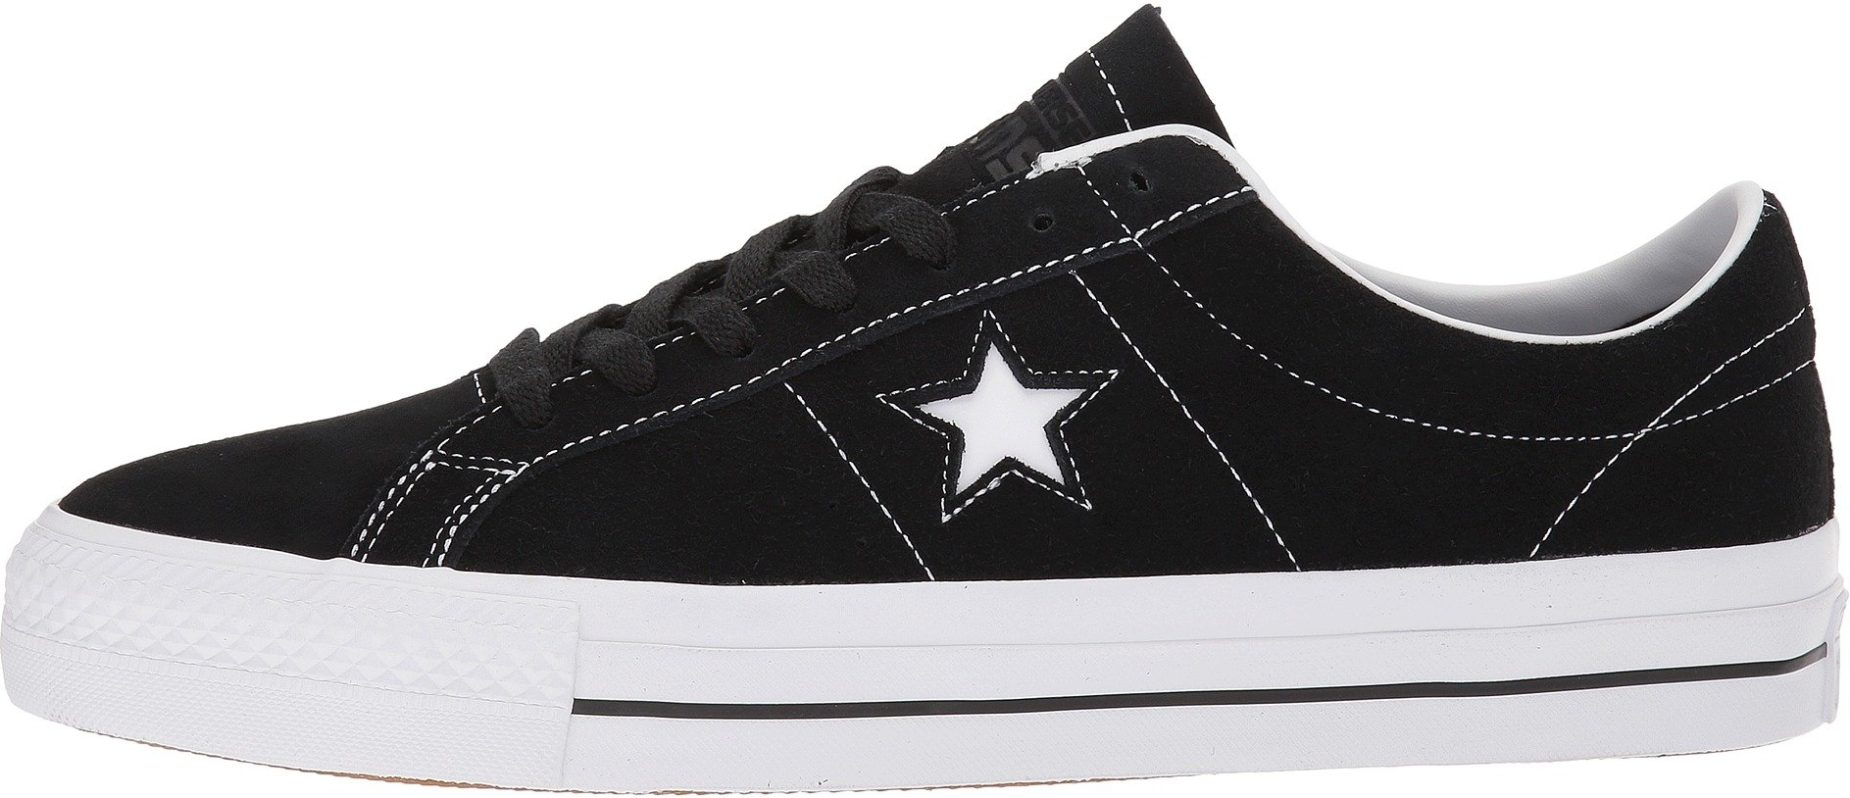 genetically cigar demand Converse CONS One Star Pro Low Top sneakers in white + black | RunRepeat